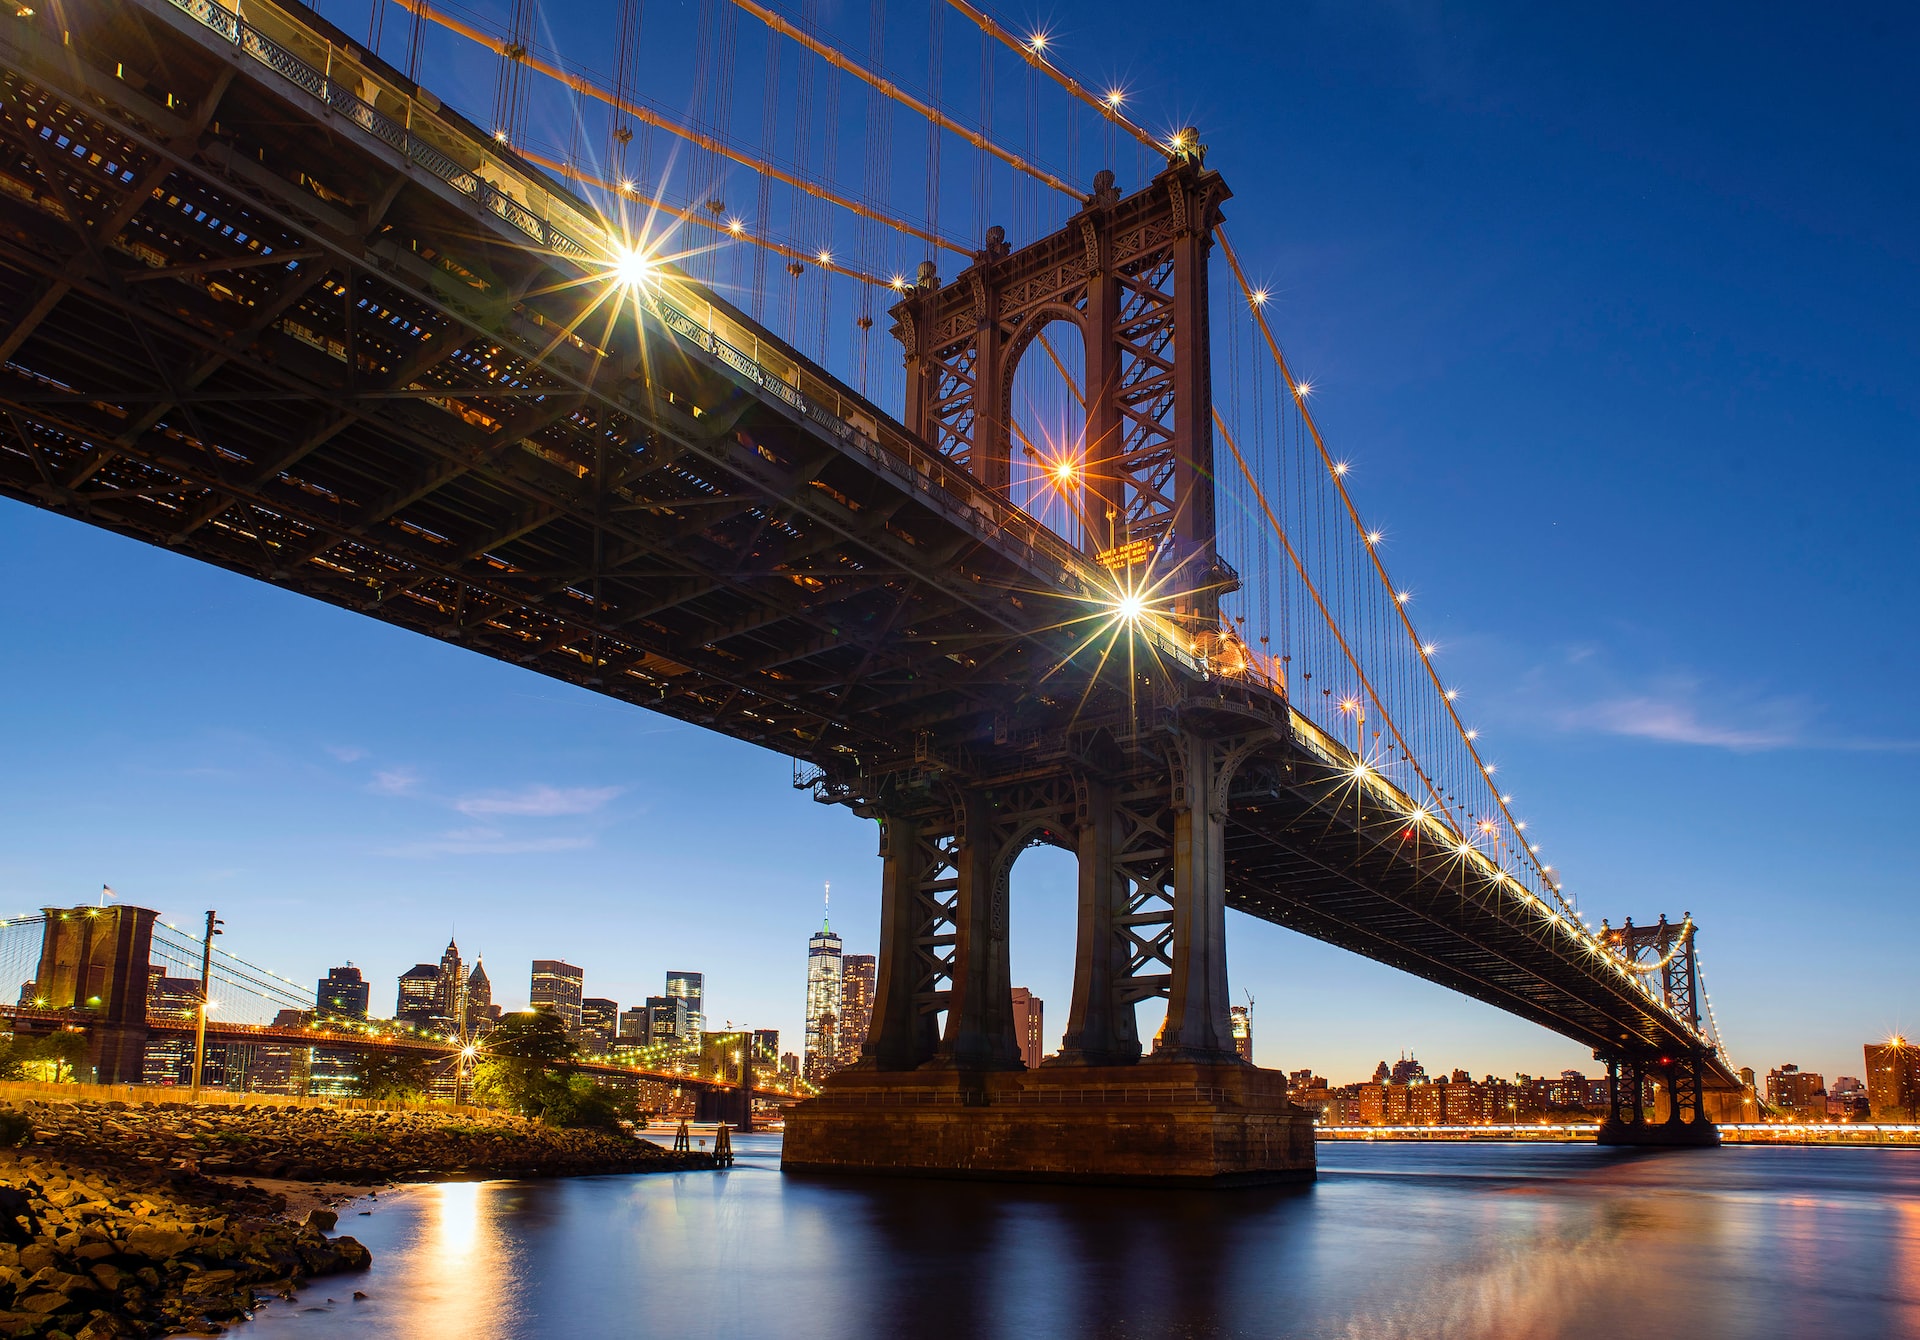 Top-rated attractions to visit in New York